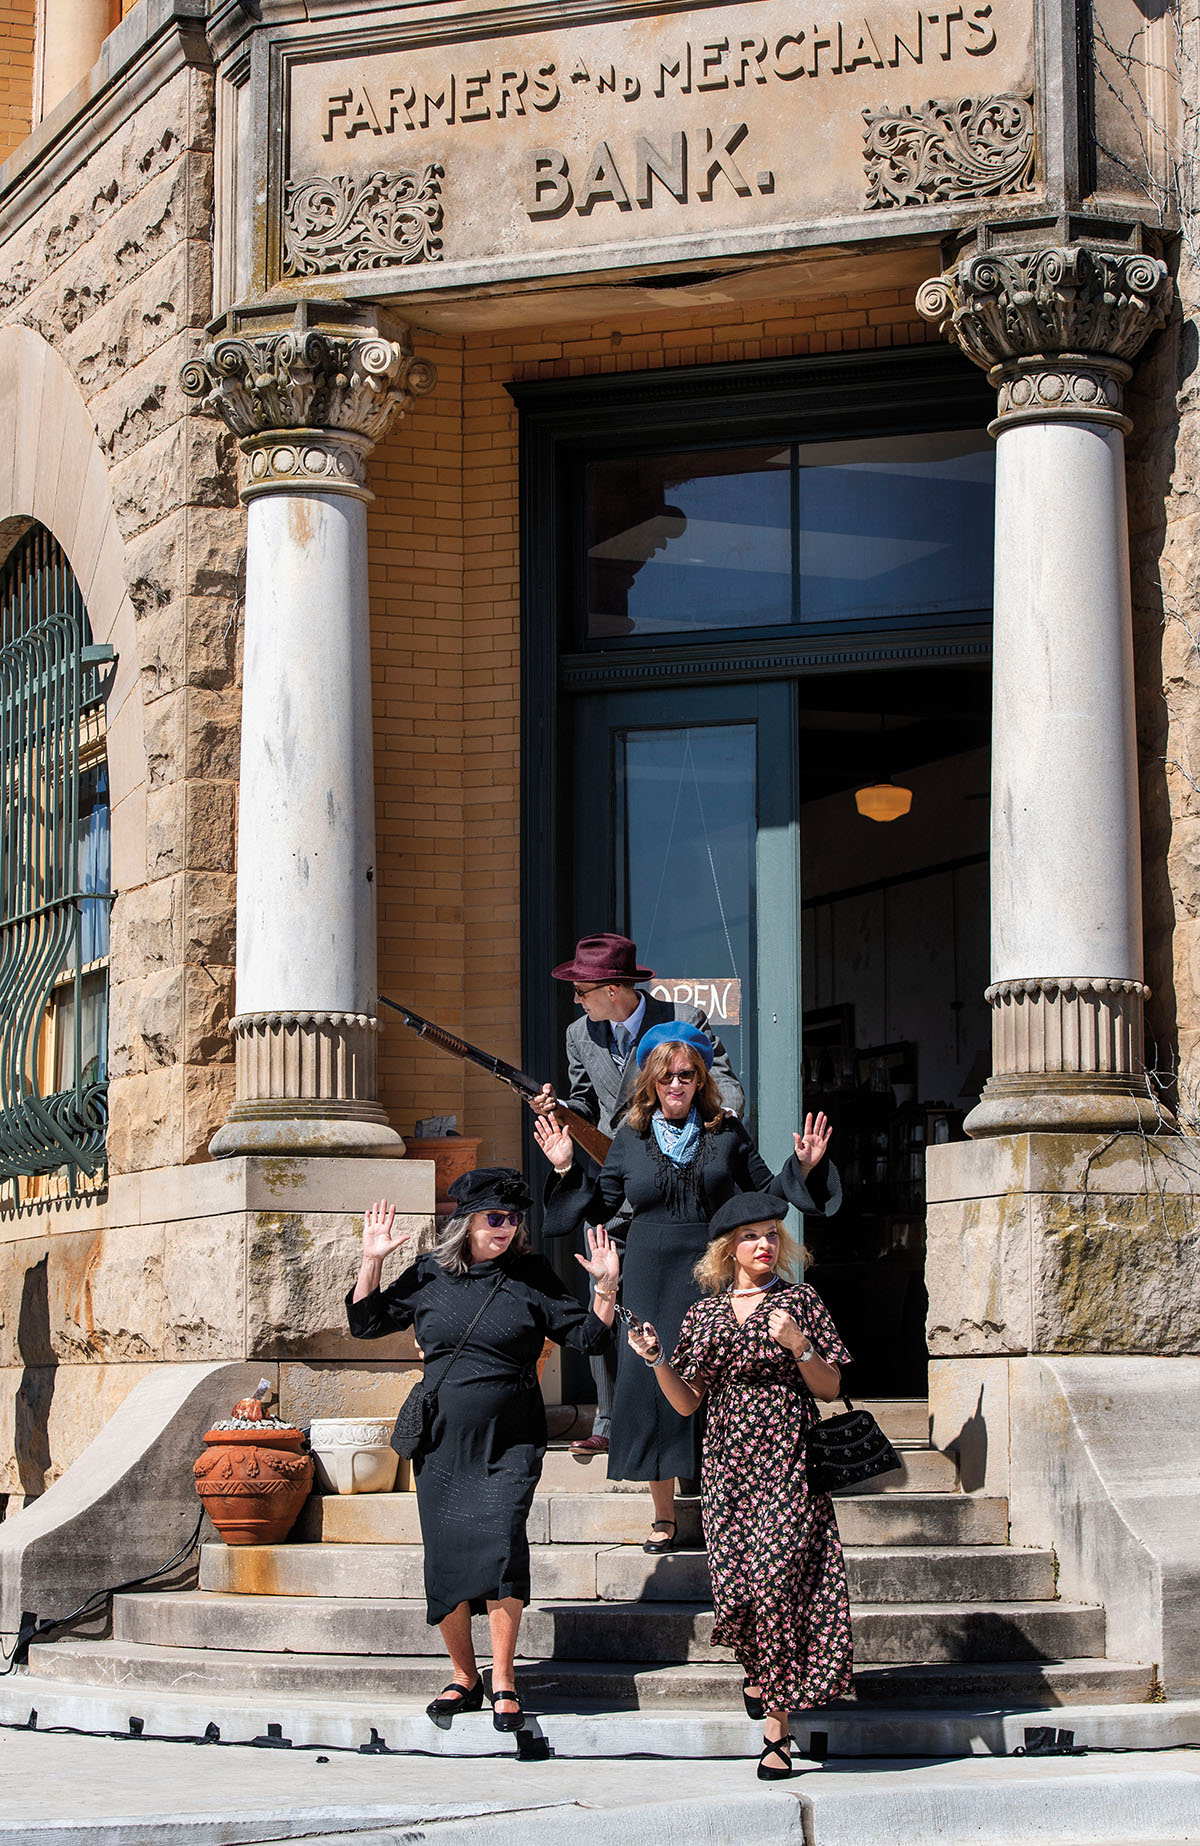 Actors in front of a bank recreate an iconic scene from Bonnie & Clyde